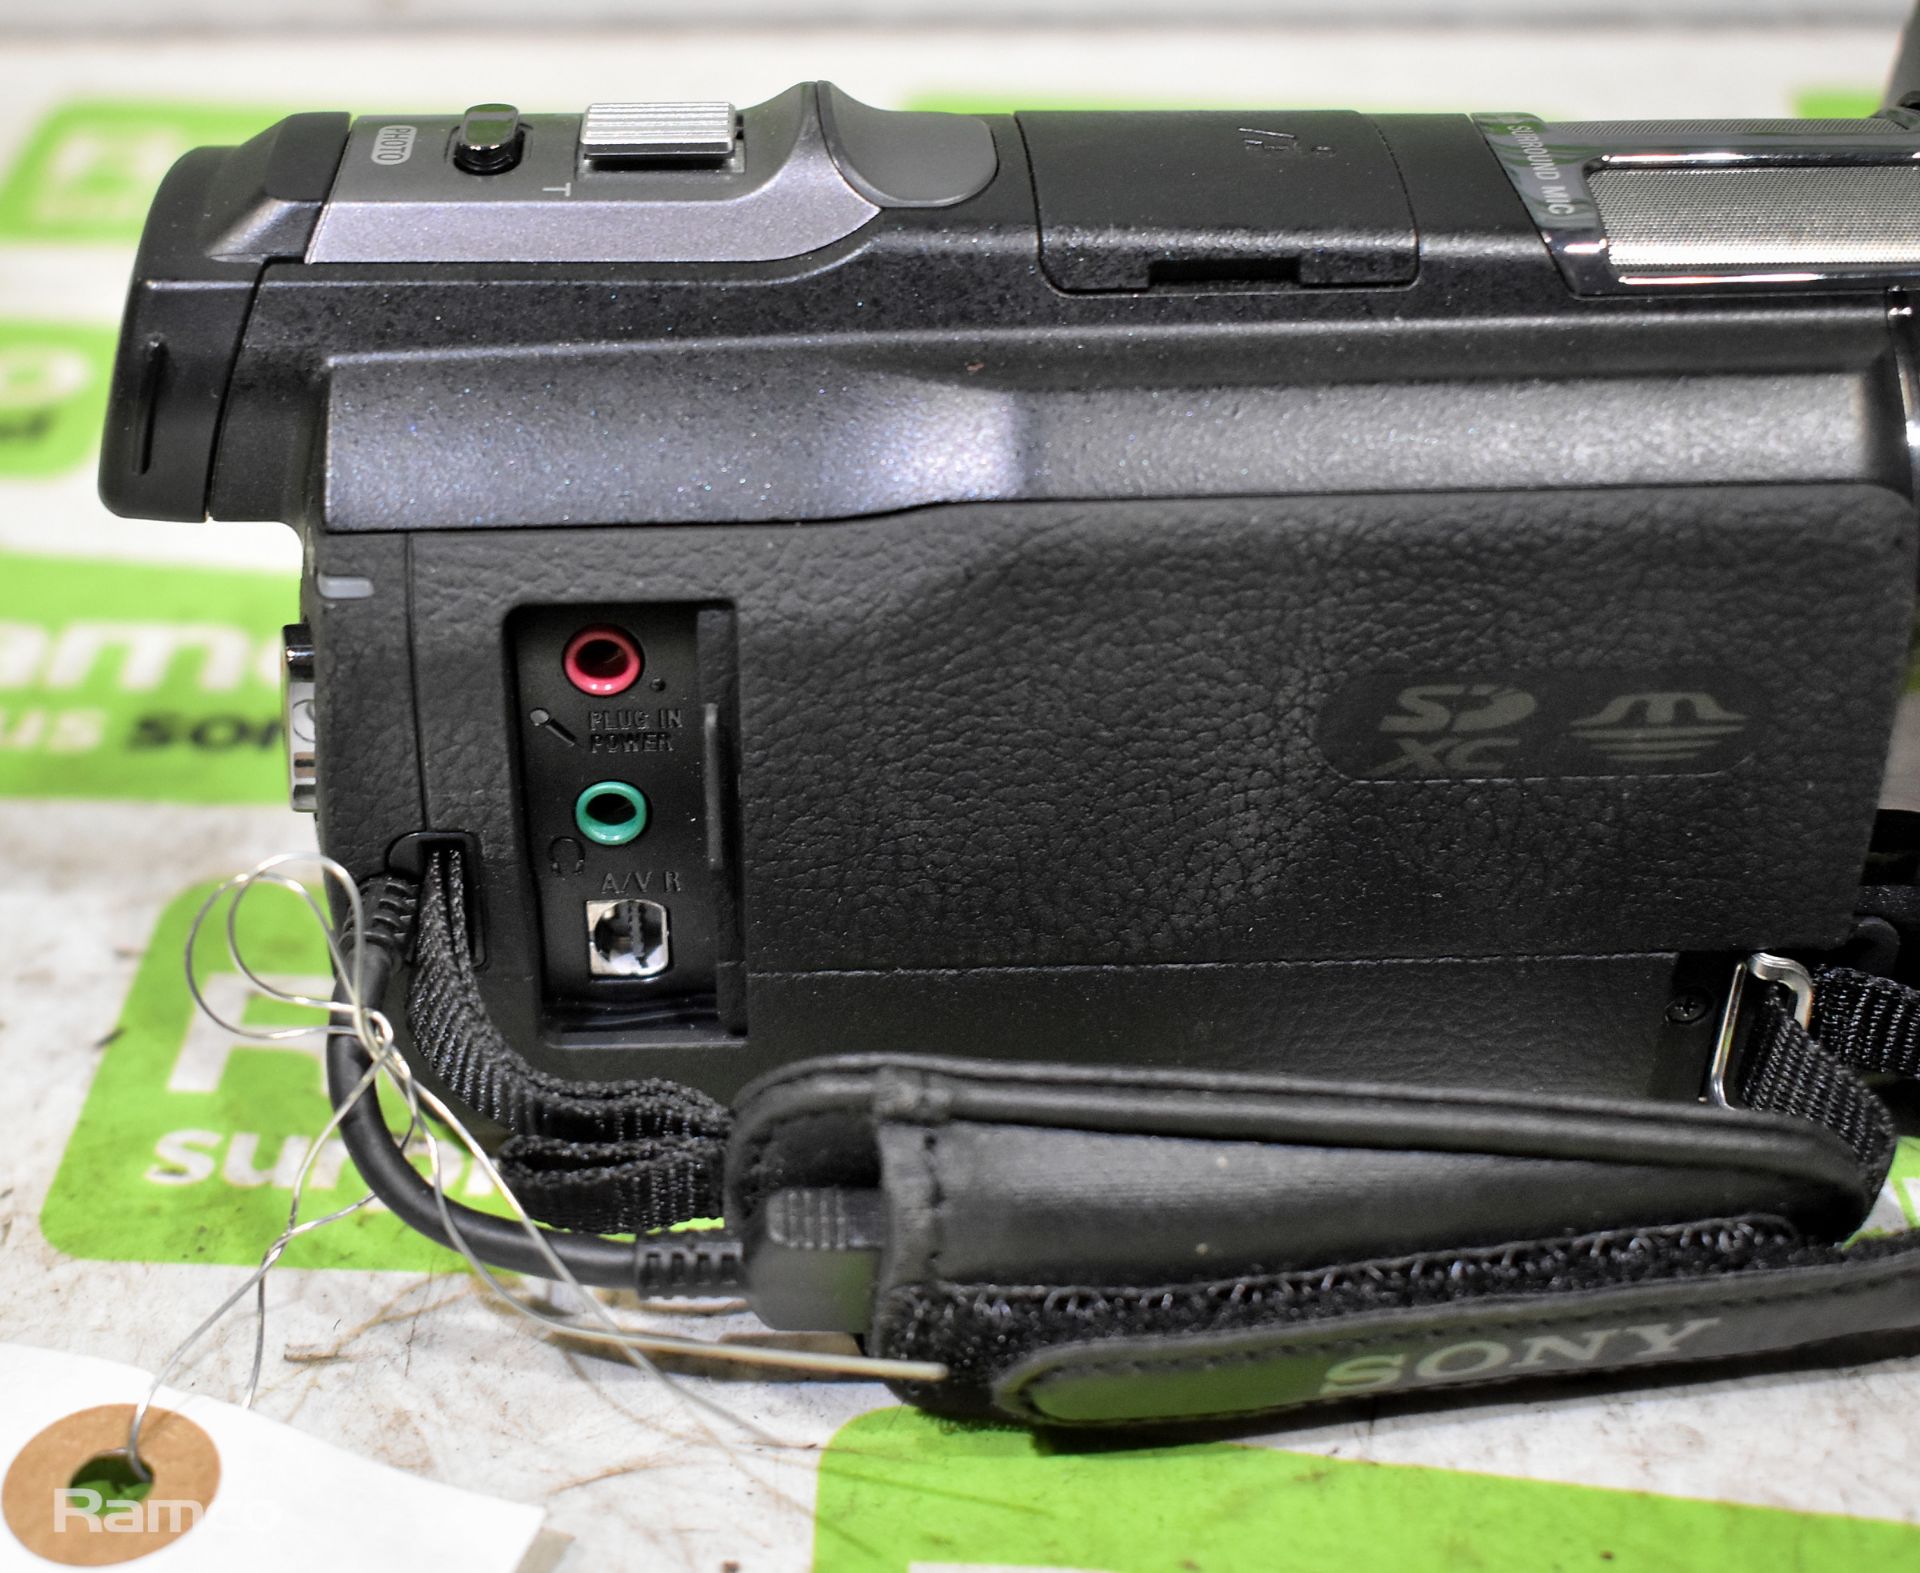 Sony HDR-CX730 camcorder (missing battery) - Bild 3 aus 7